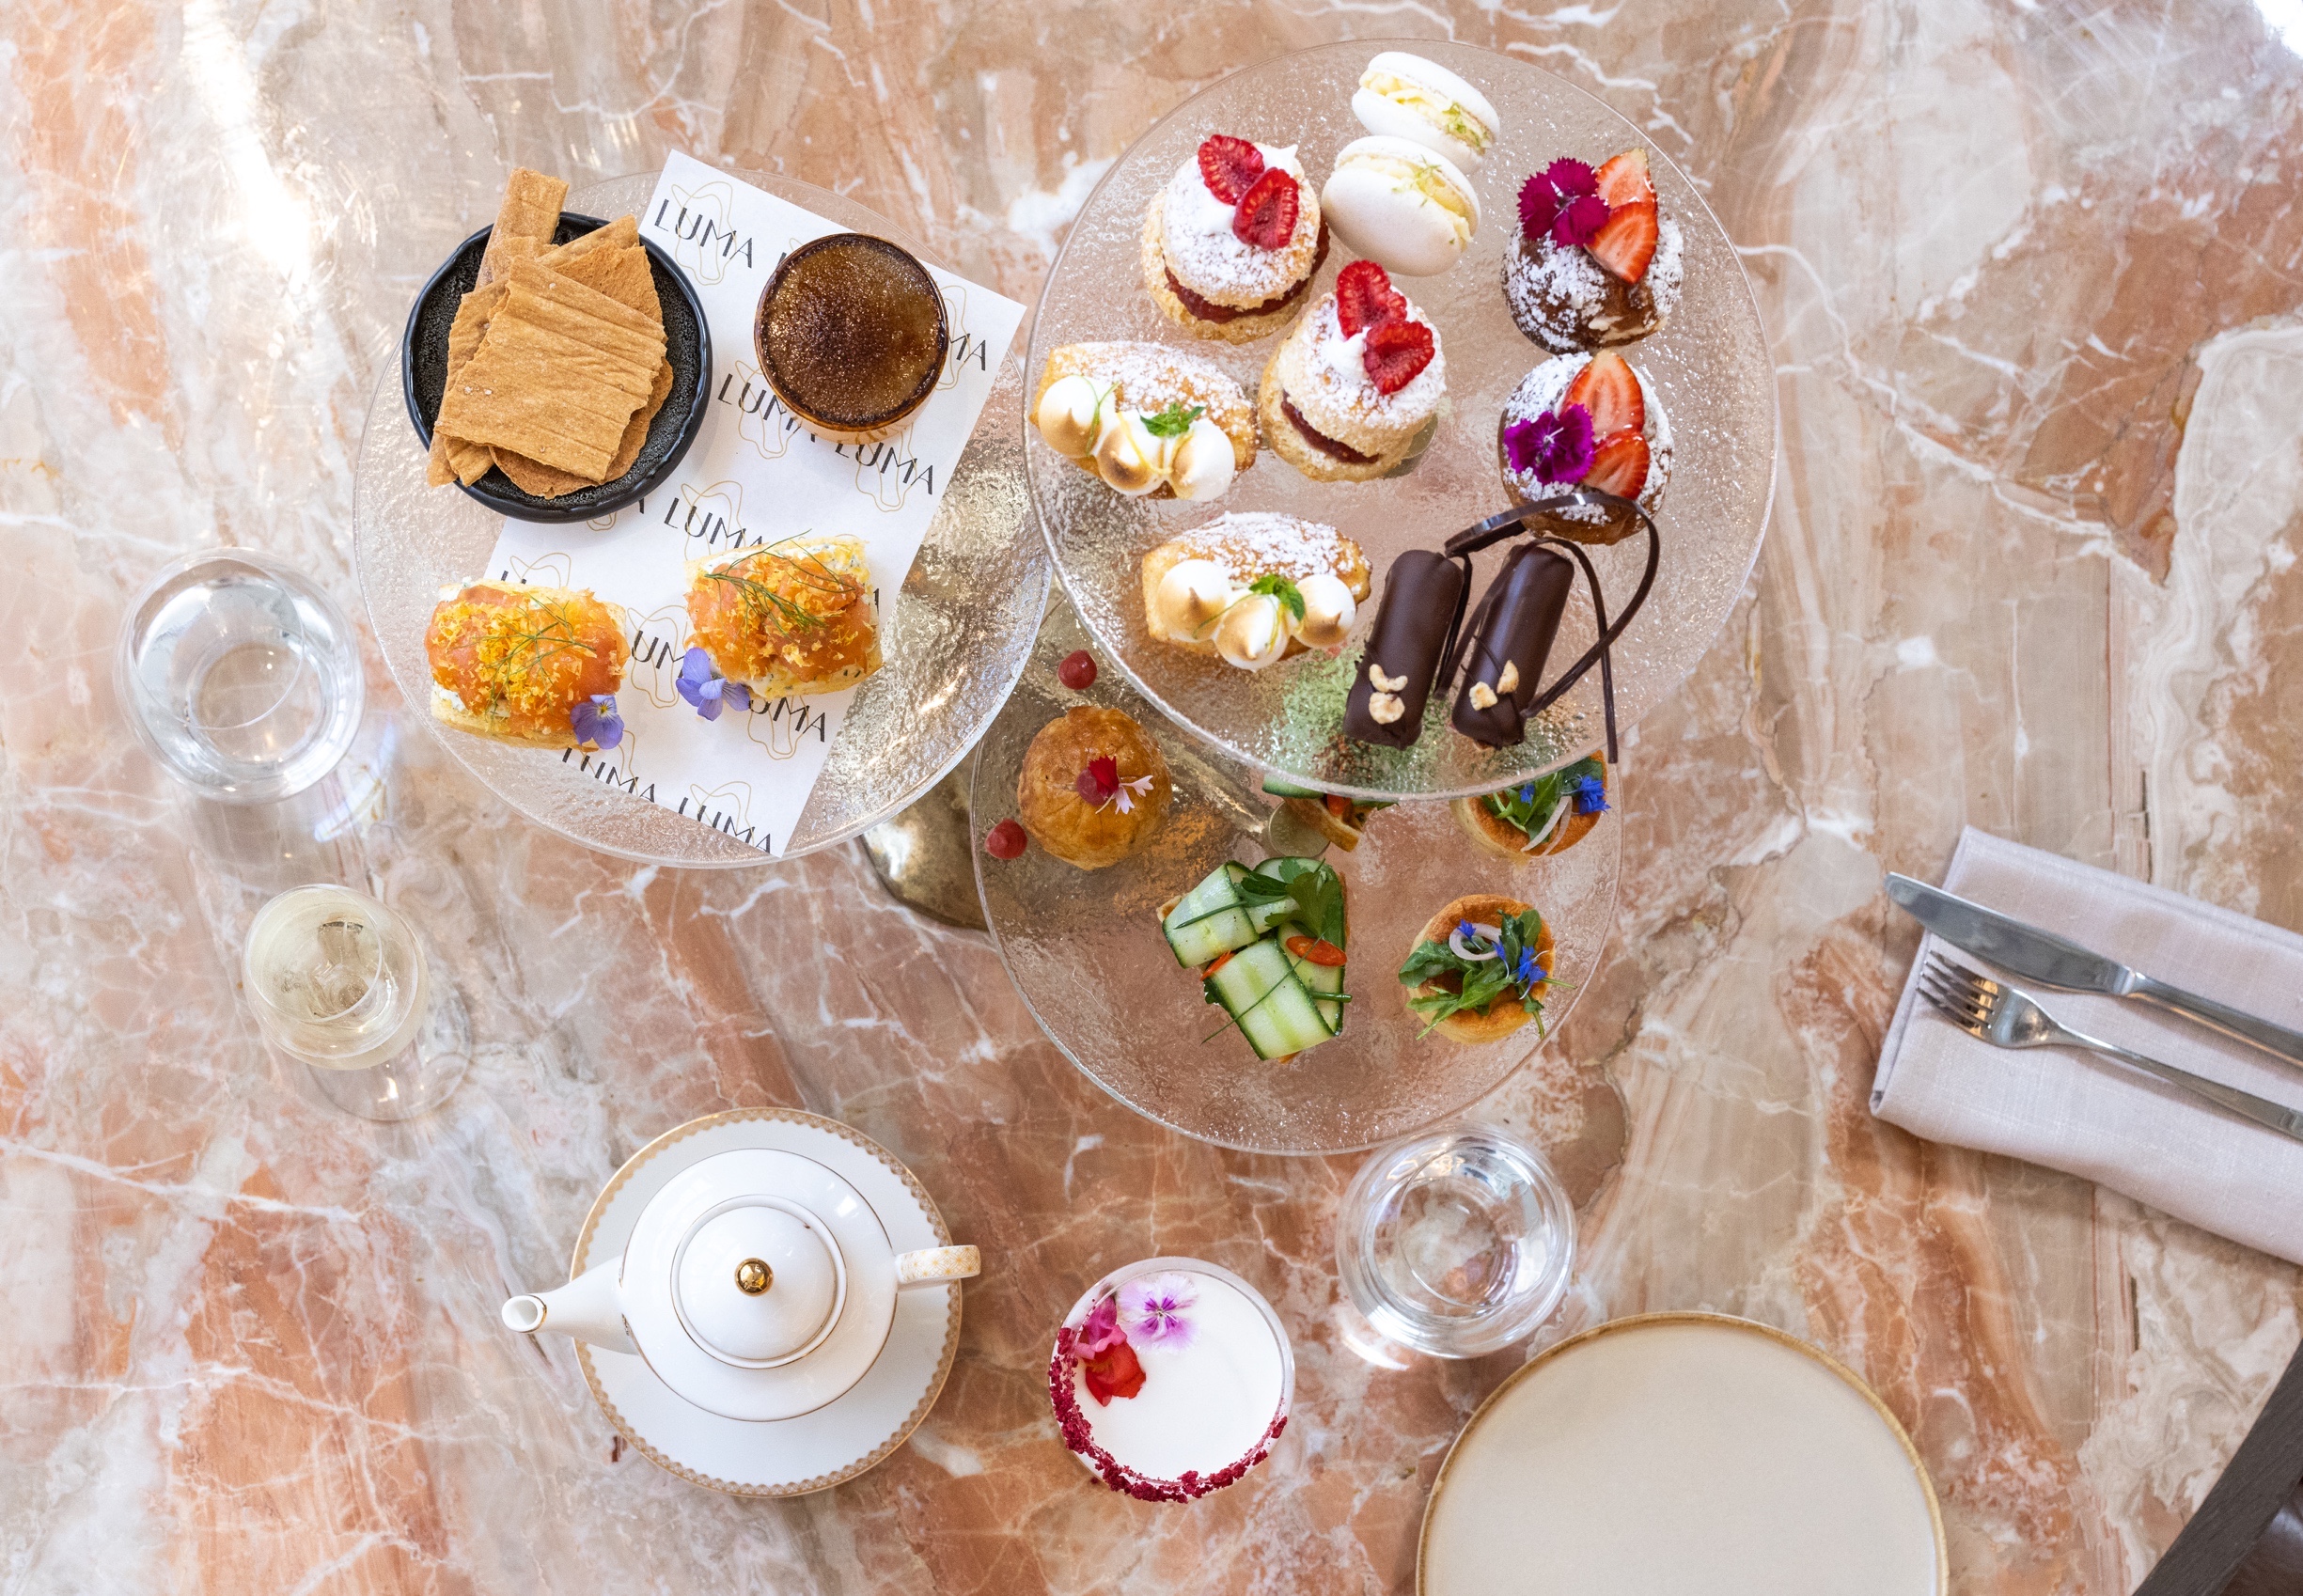 WIN a Luma High Tea Experience for 4 People at The Playford Hotel!